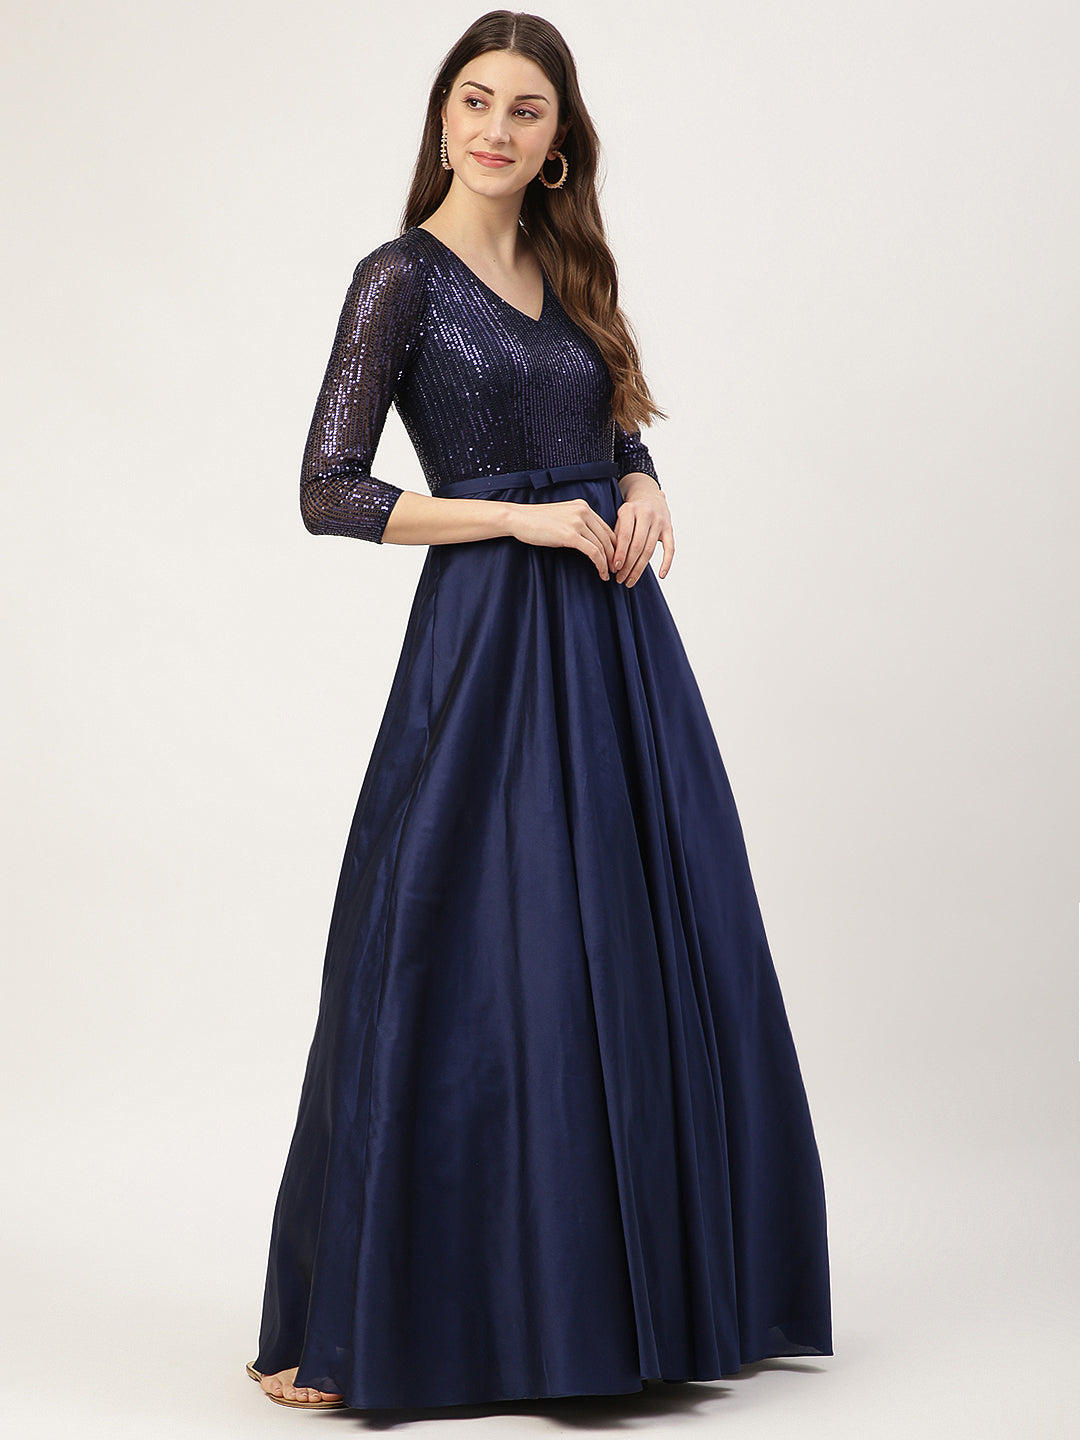 Navy Embellished Ball Gown with 3/4 Sleeves